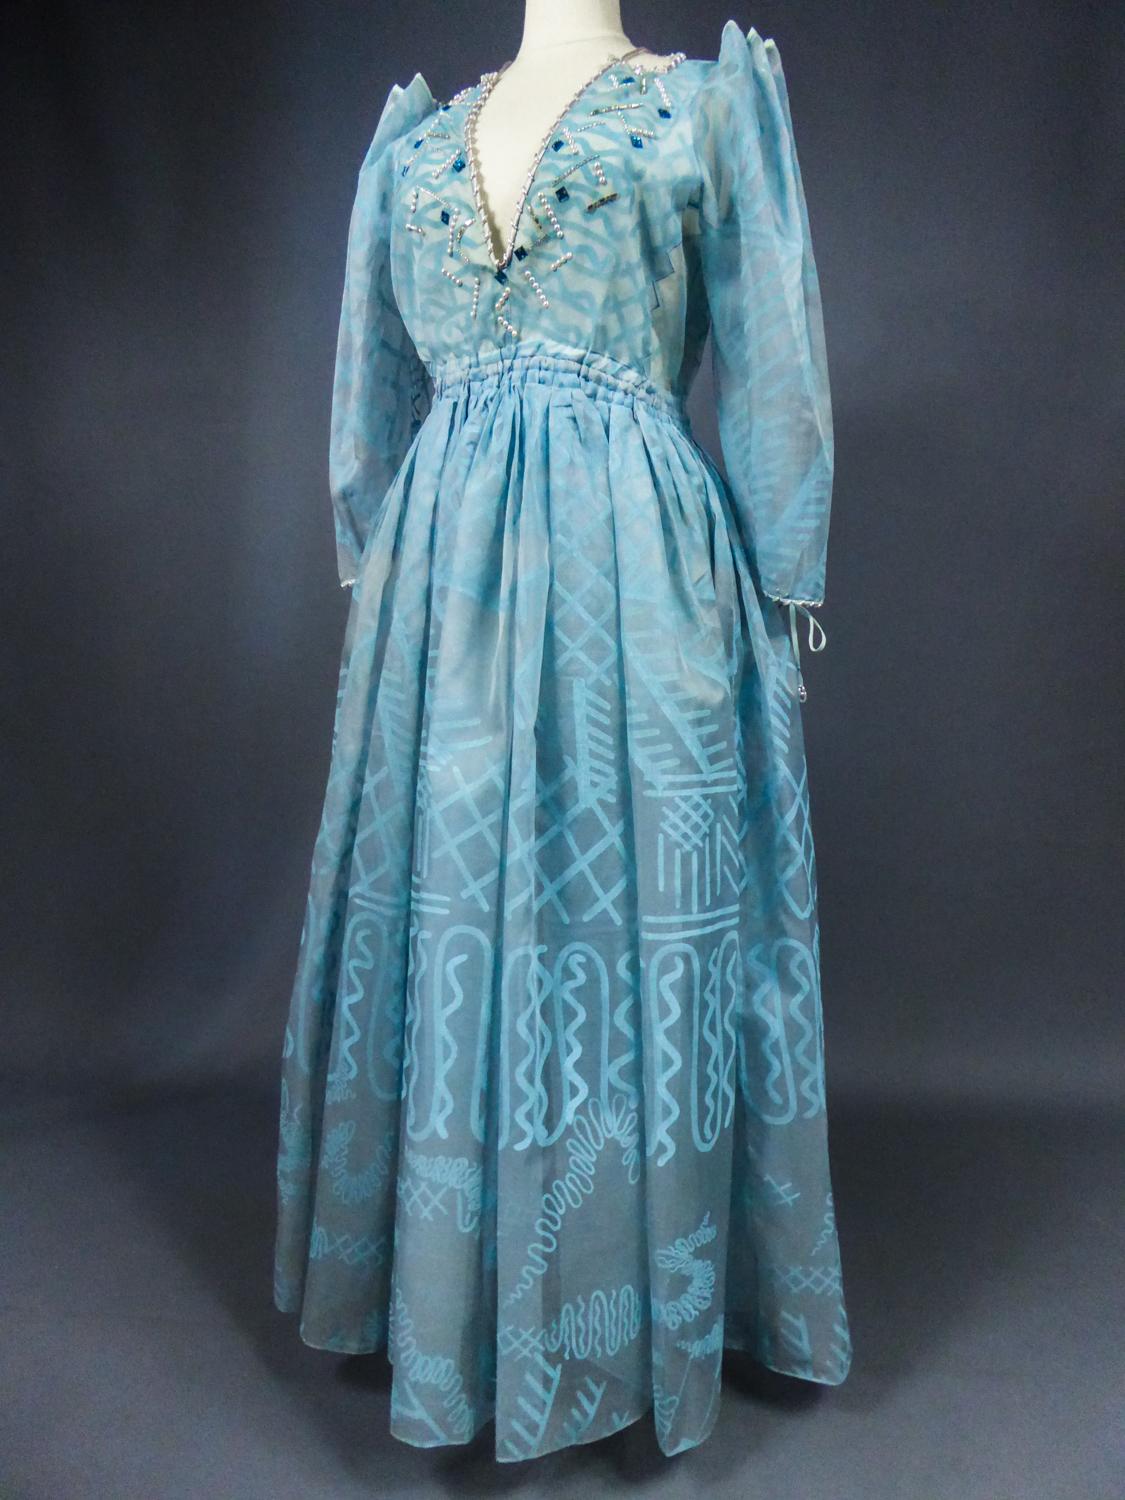 A Zandra Rhodes Evening Dress in Printed Organza - Fortuny Influence- Circa 1980 For Sale 5